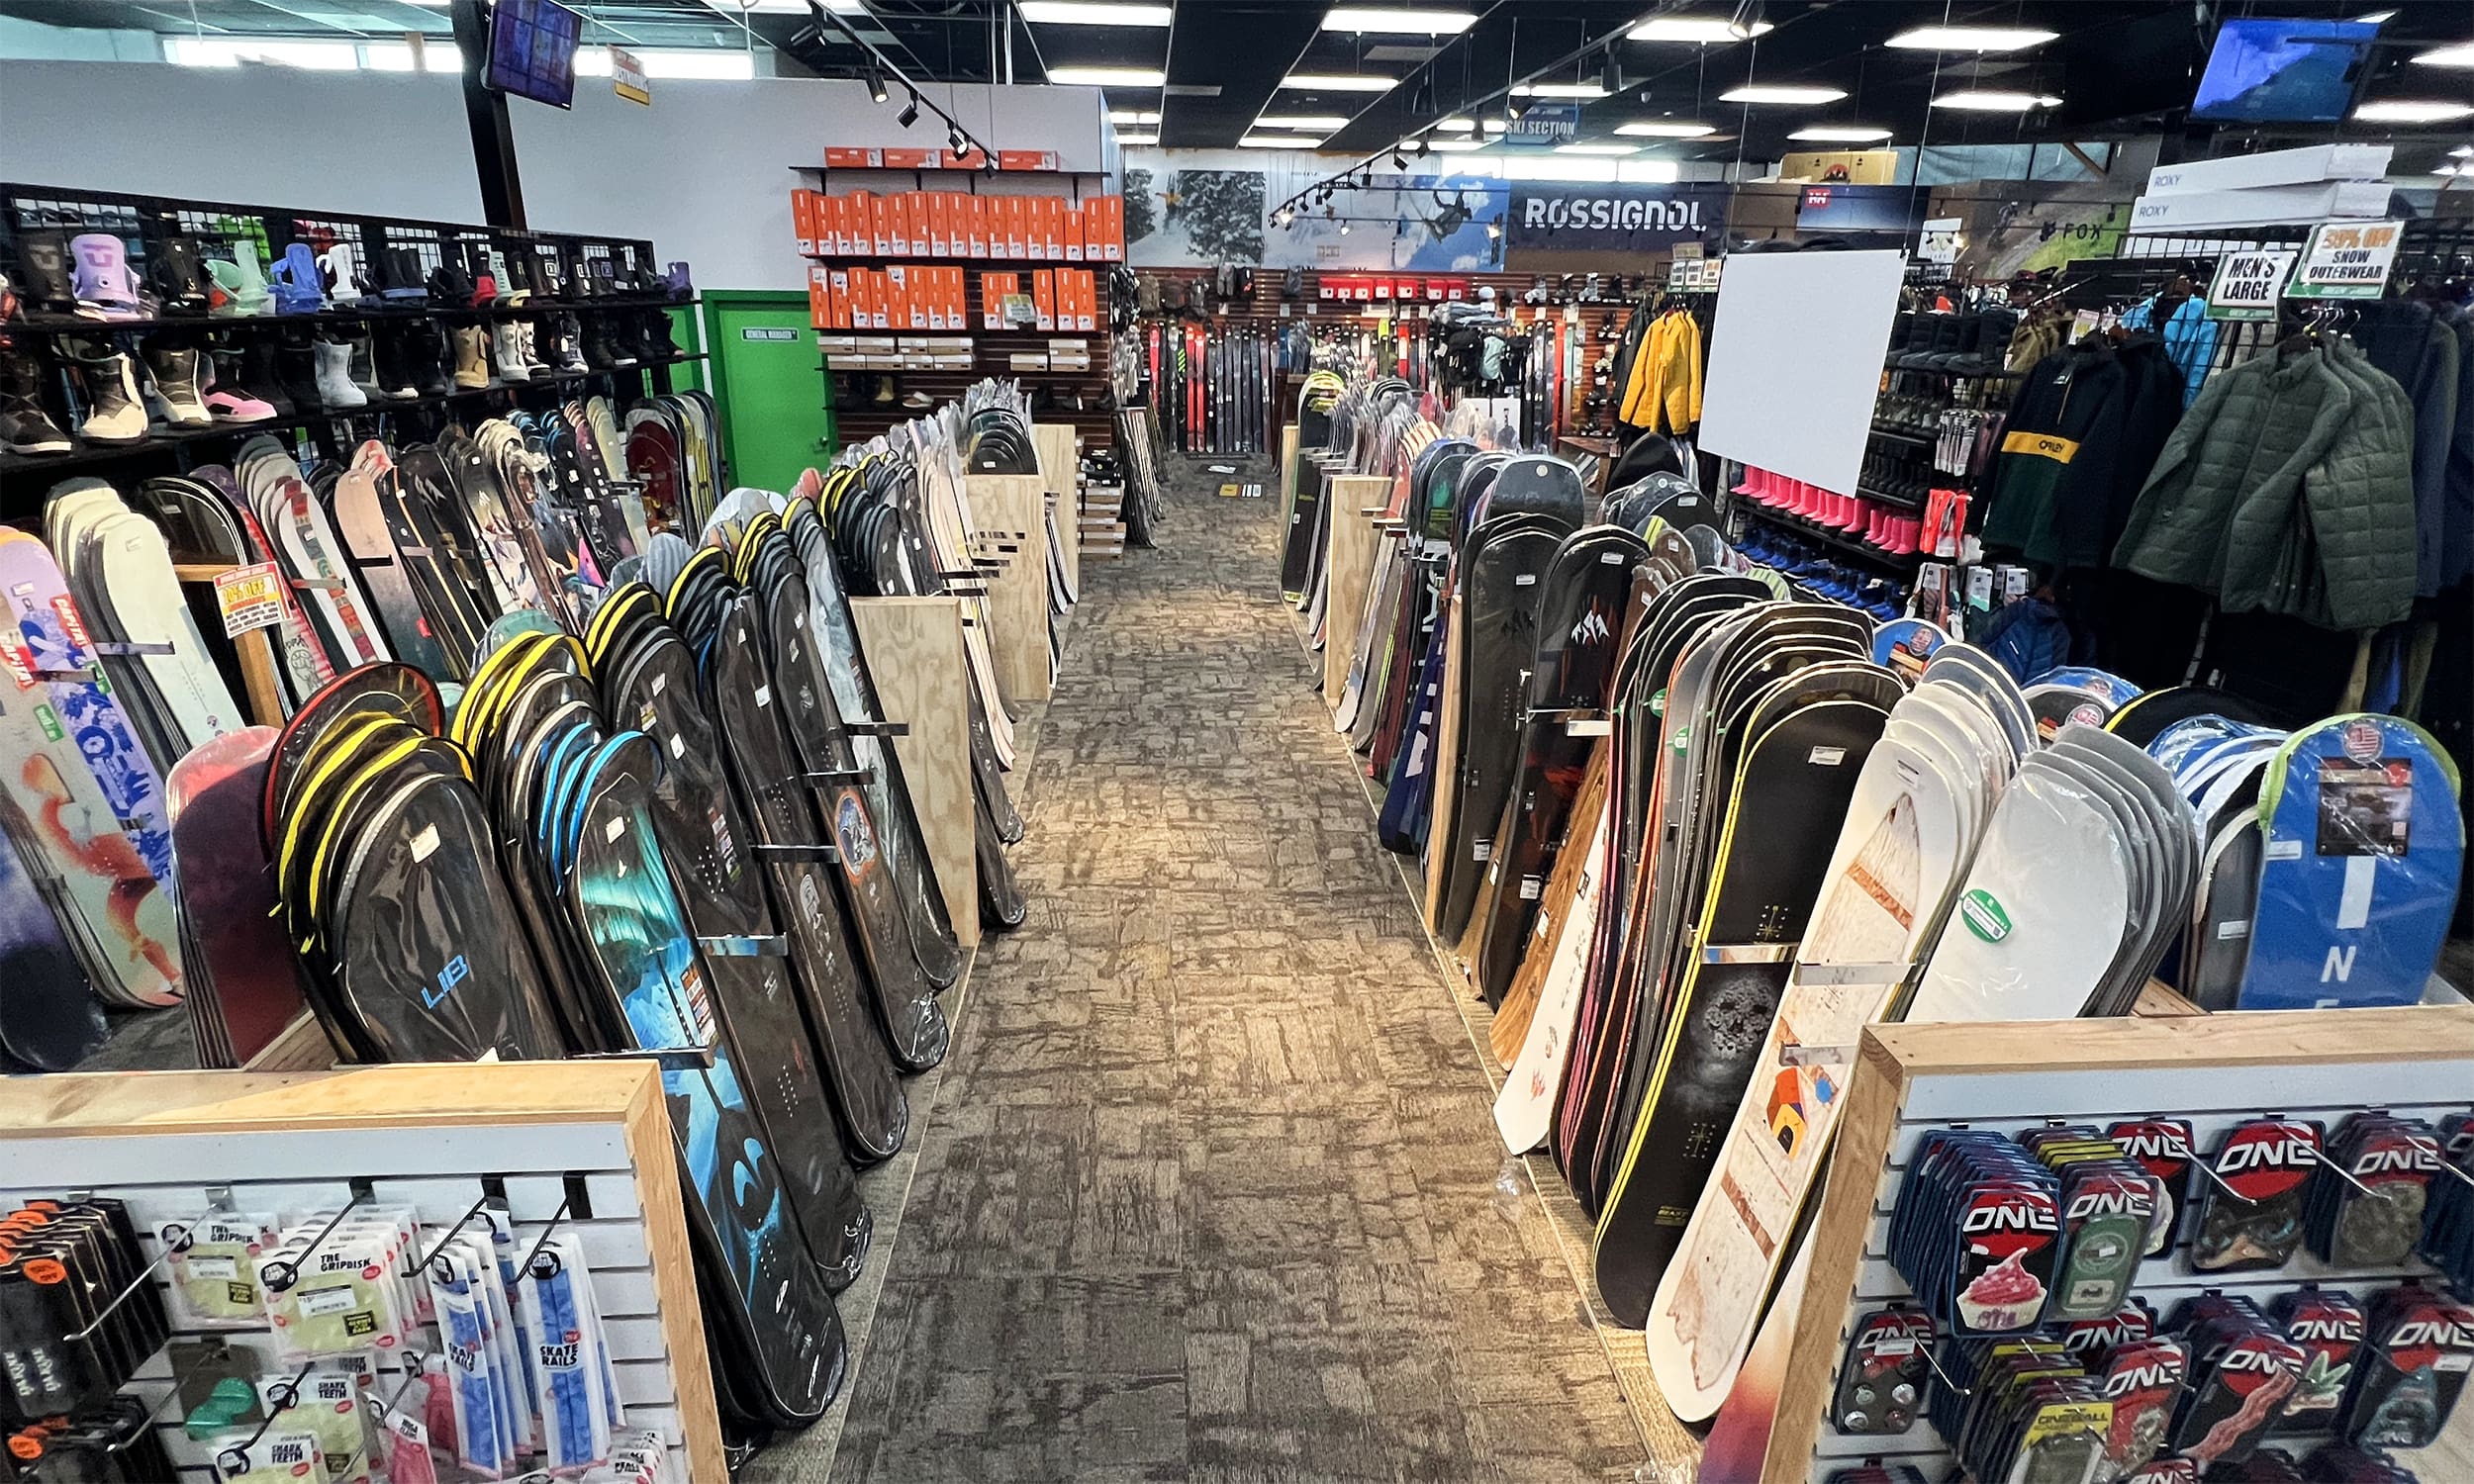 A long hallway with many different types of skis on it.